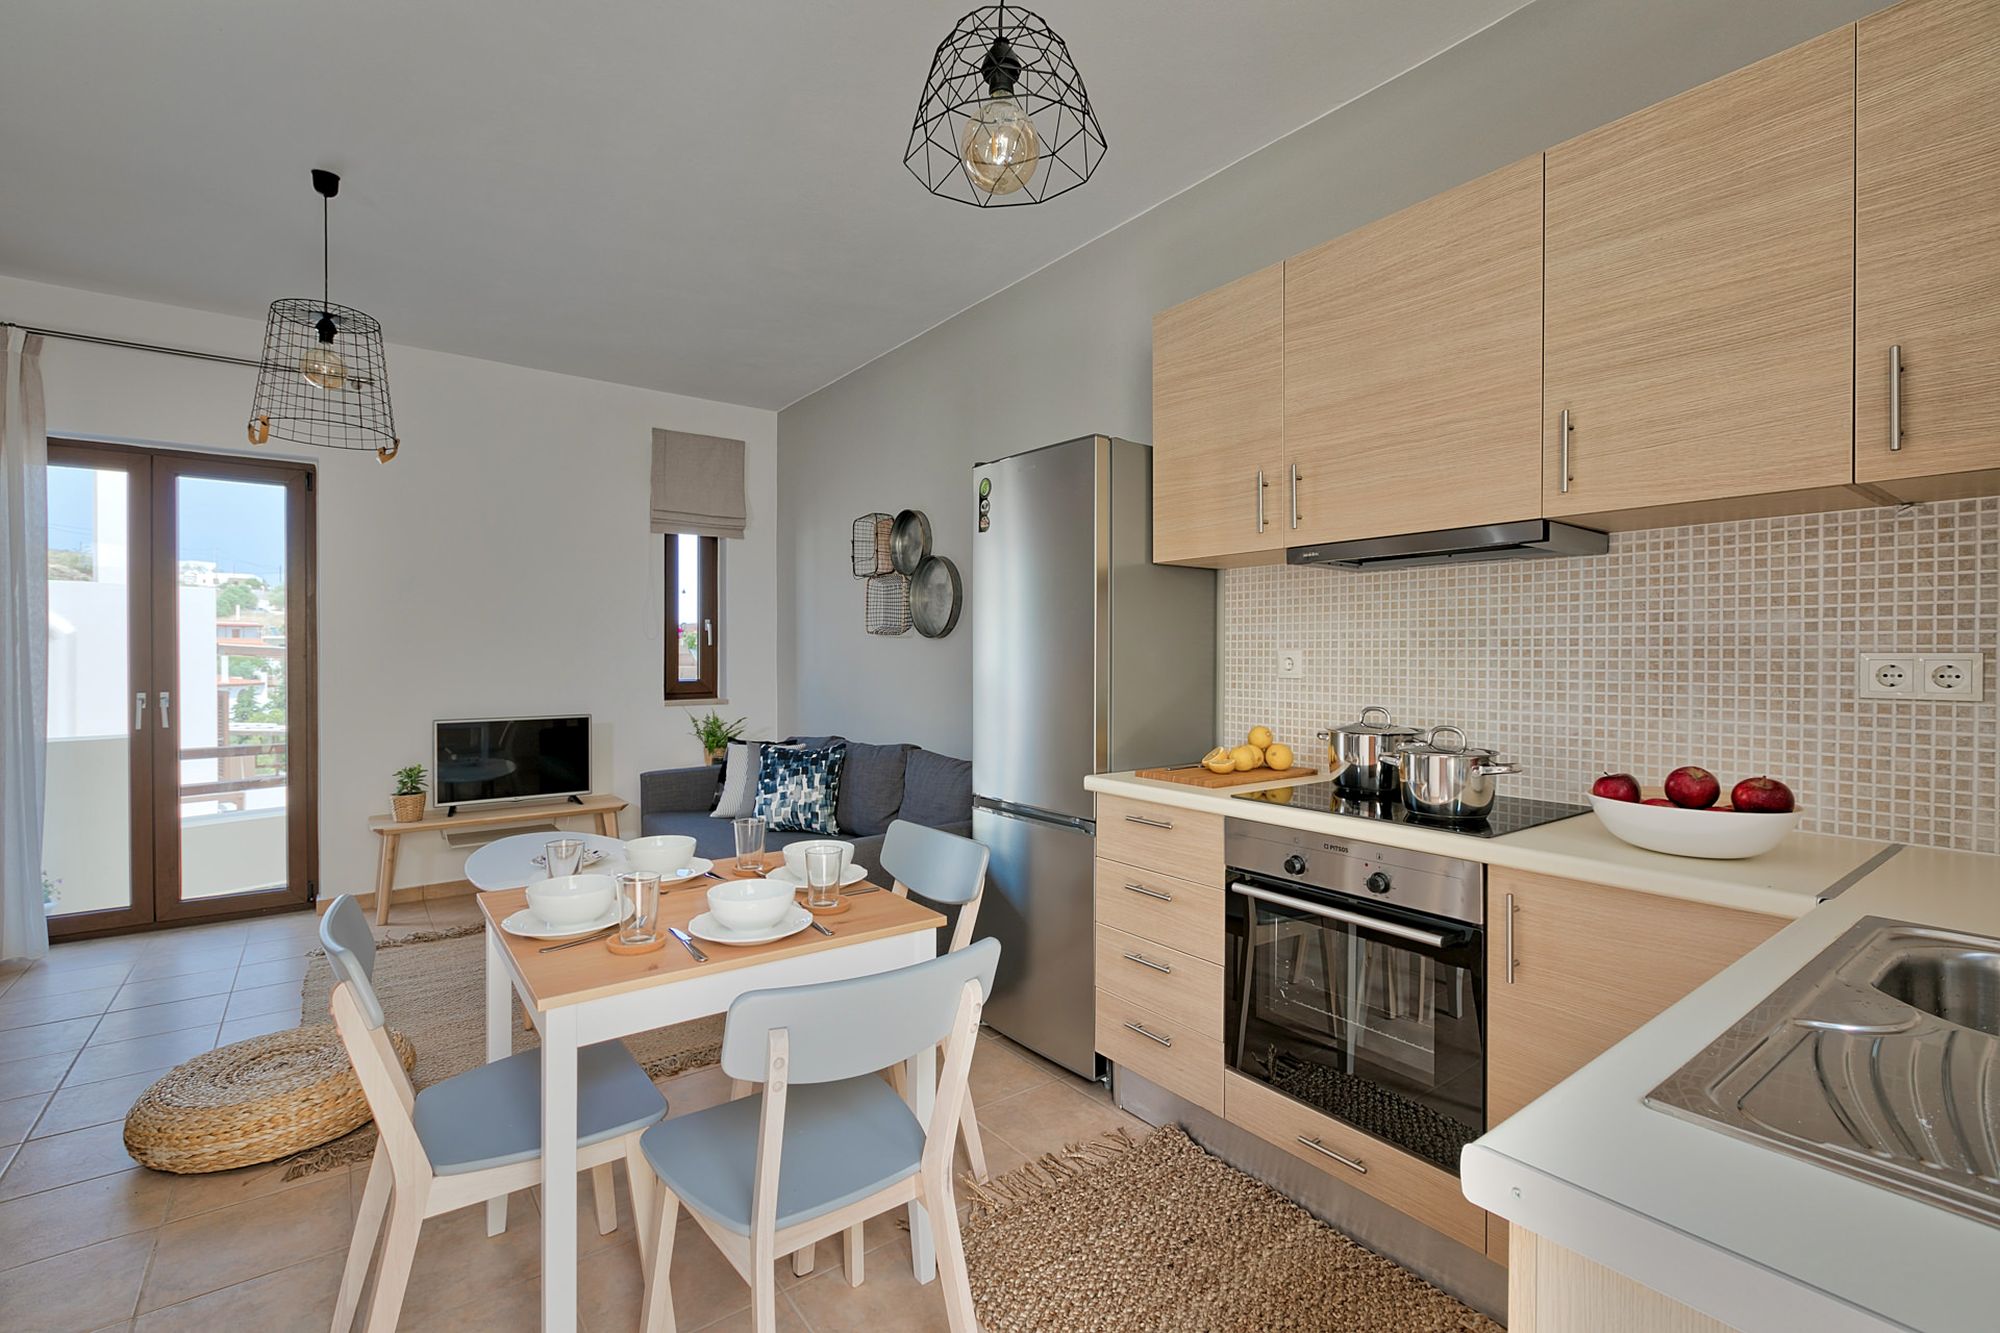 In open space with the living room, a fully equipped kitchen with an inox fridge, an electric cooker oven and a dining table with modern white dinnerware on it.